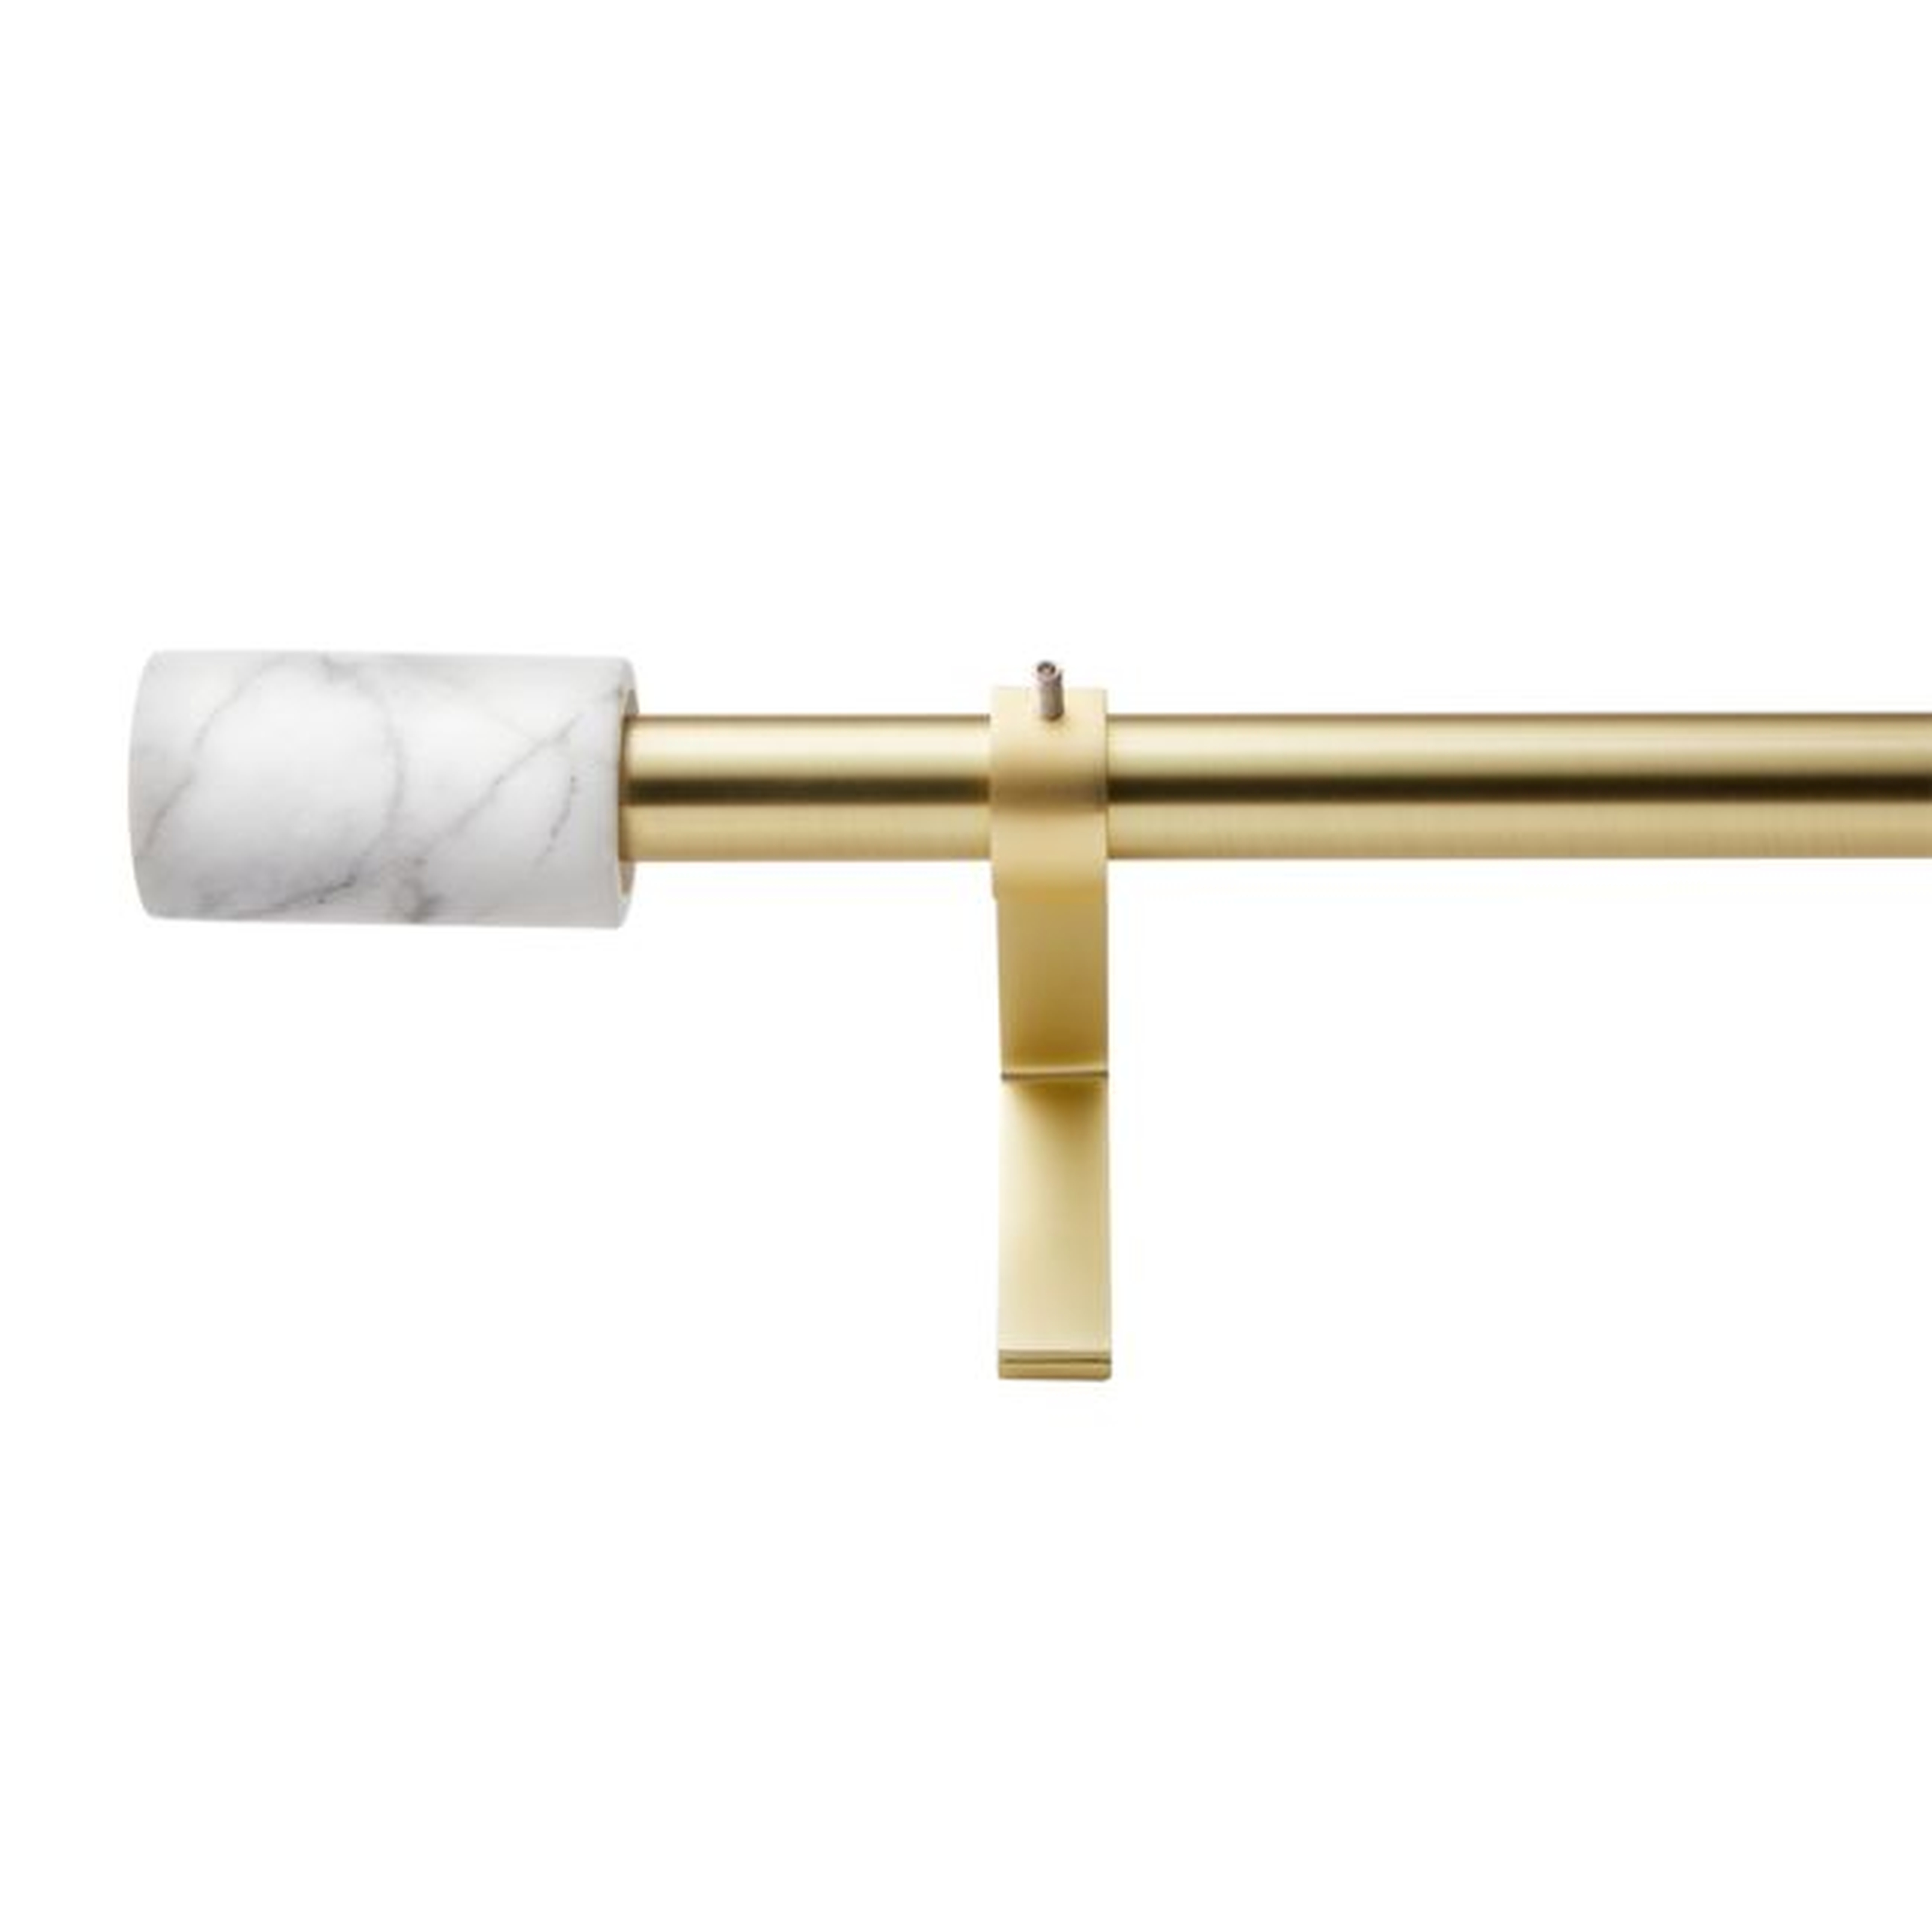 Brushed Brass with White Marble Finial Curtain Rod Set 88"-120"x.75"Dia. - CB2